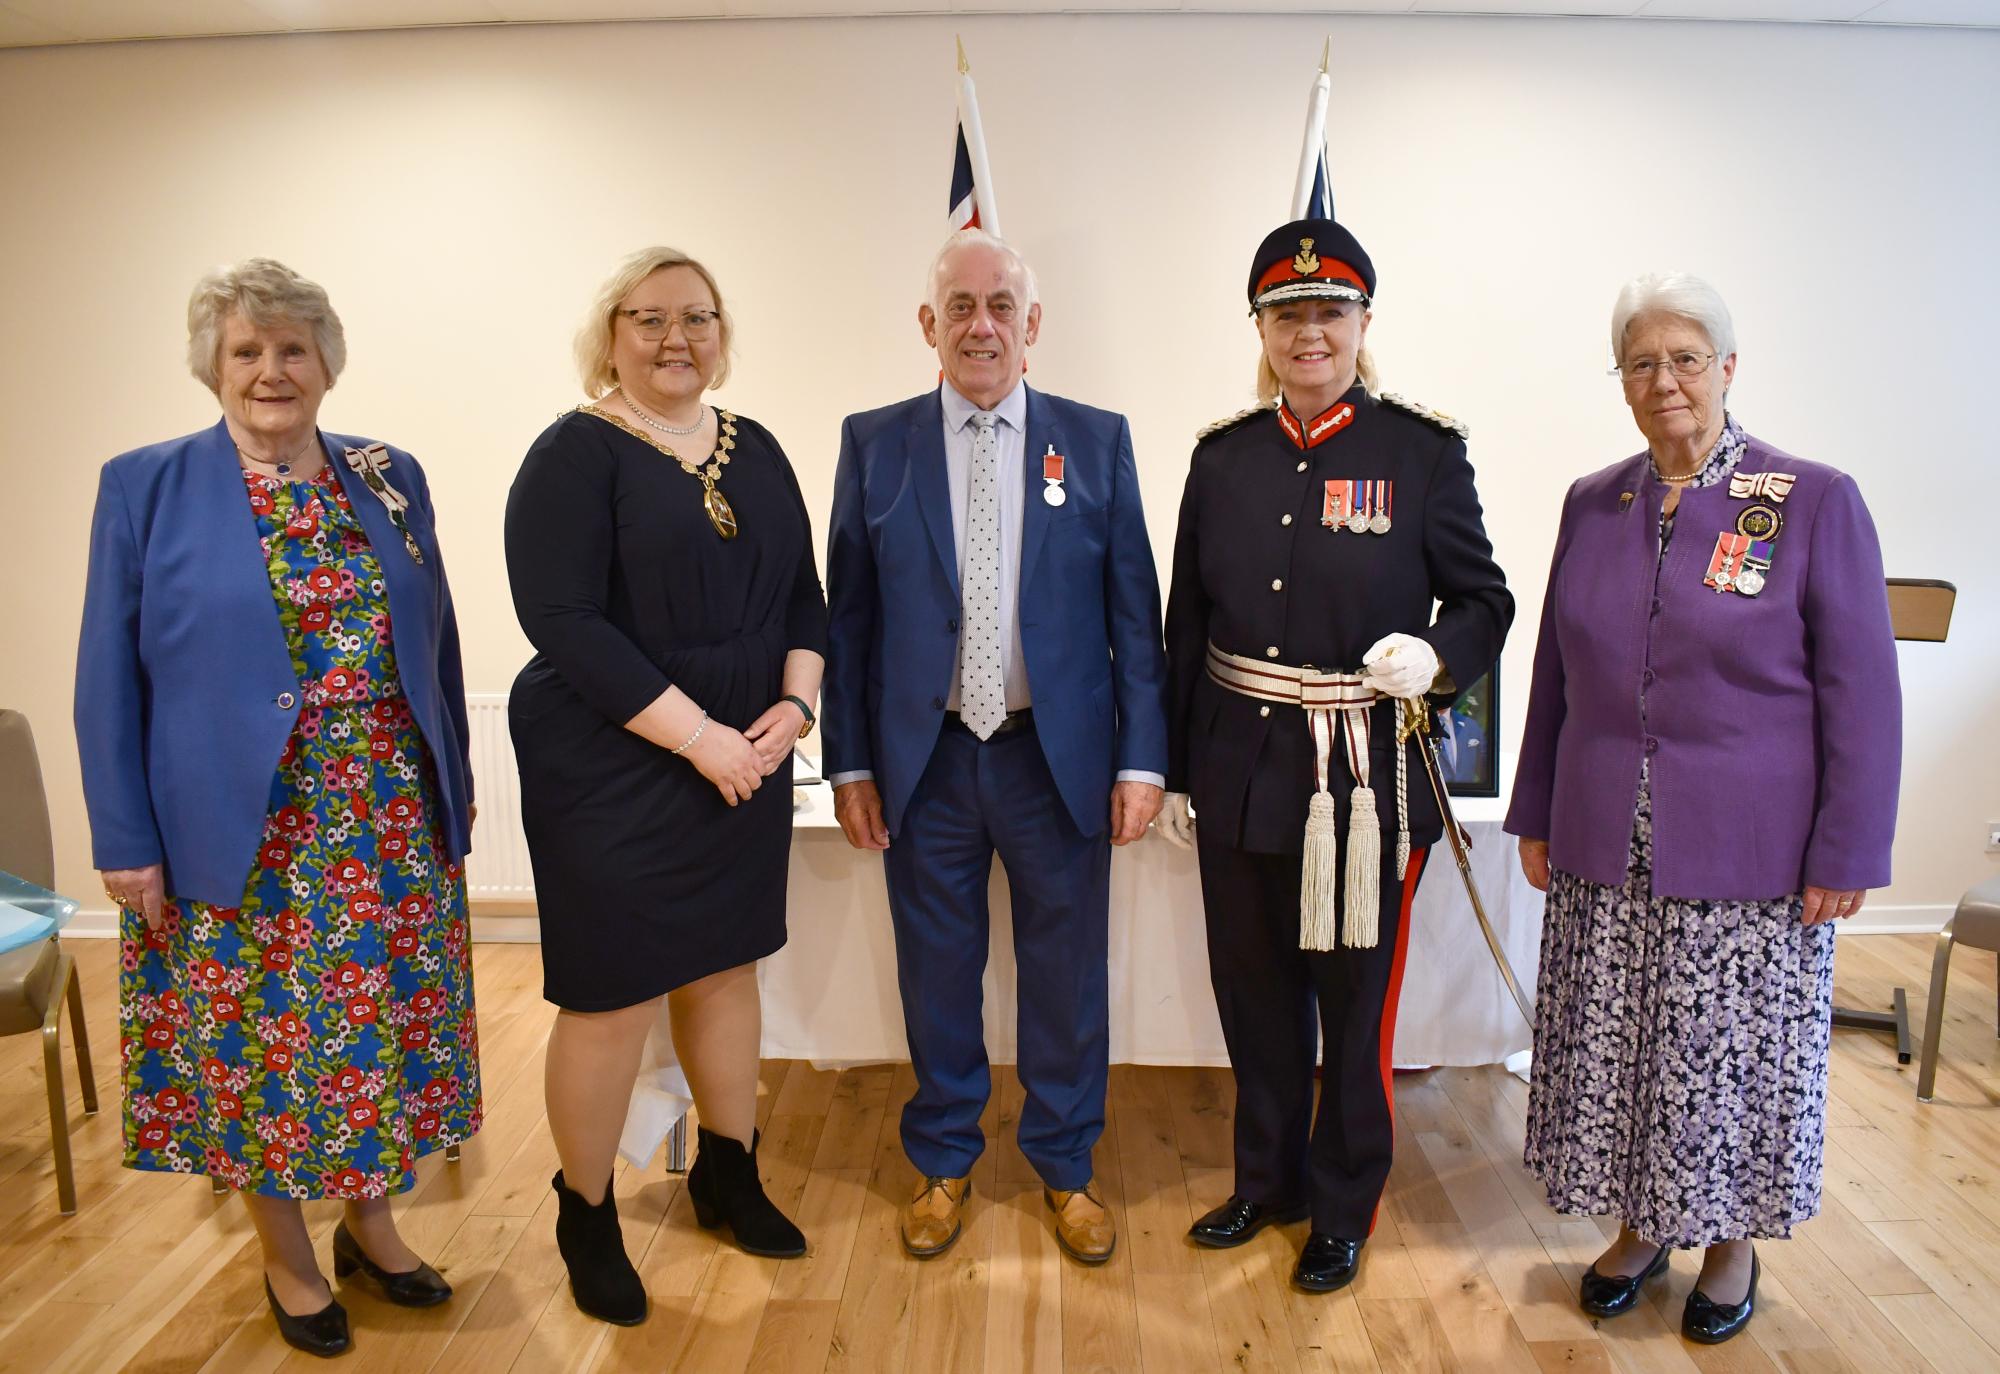 Billy and Lord Lieutenant, Provost and Vice Lord Lieutenants